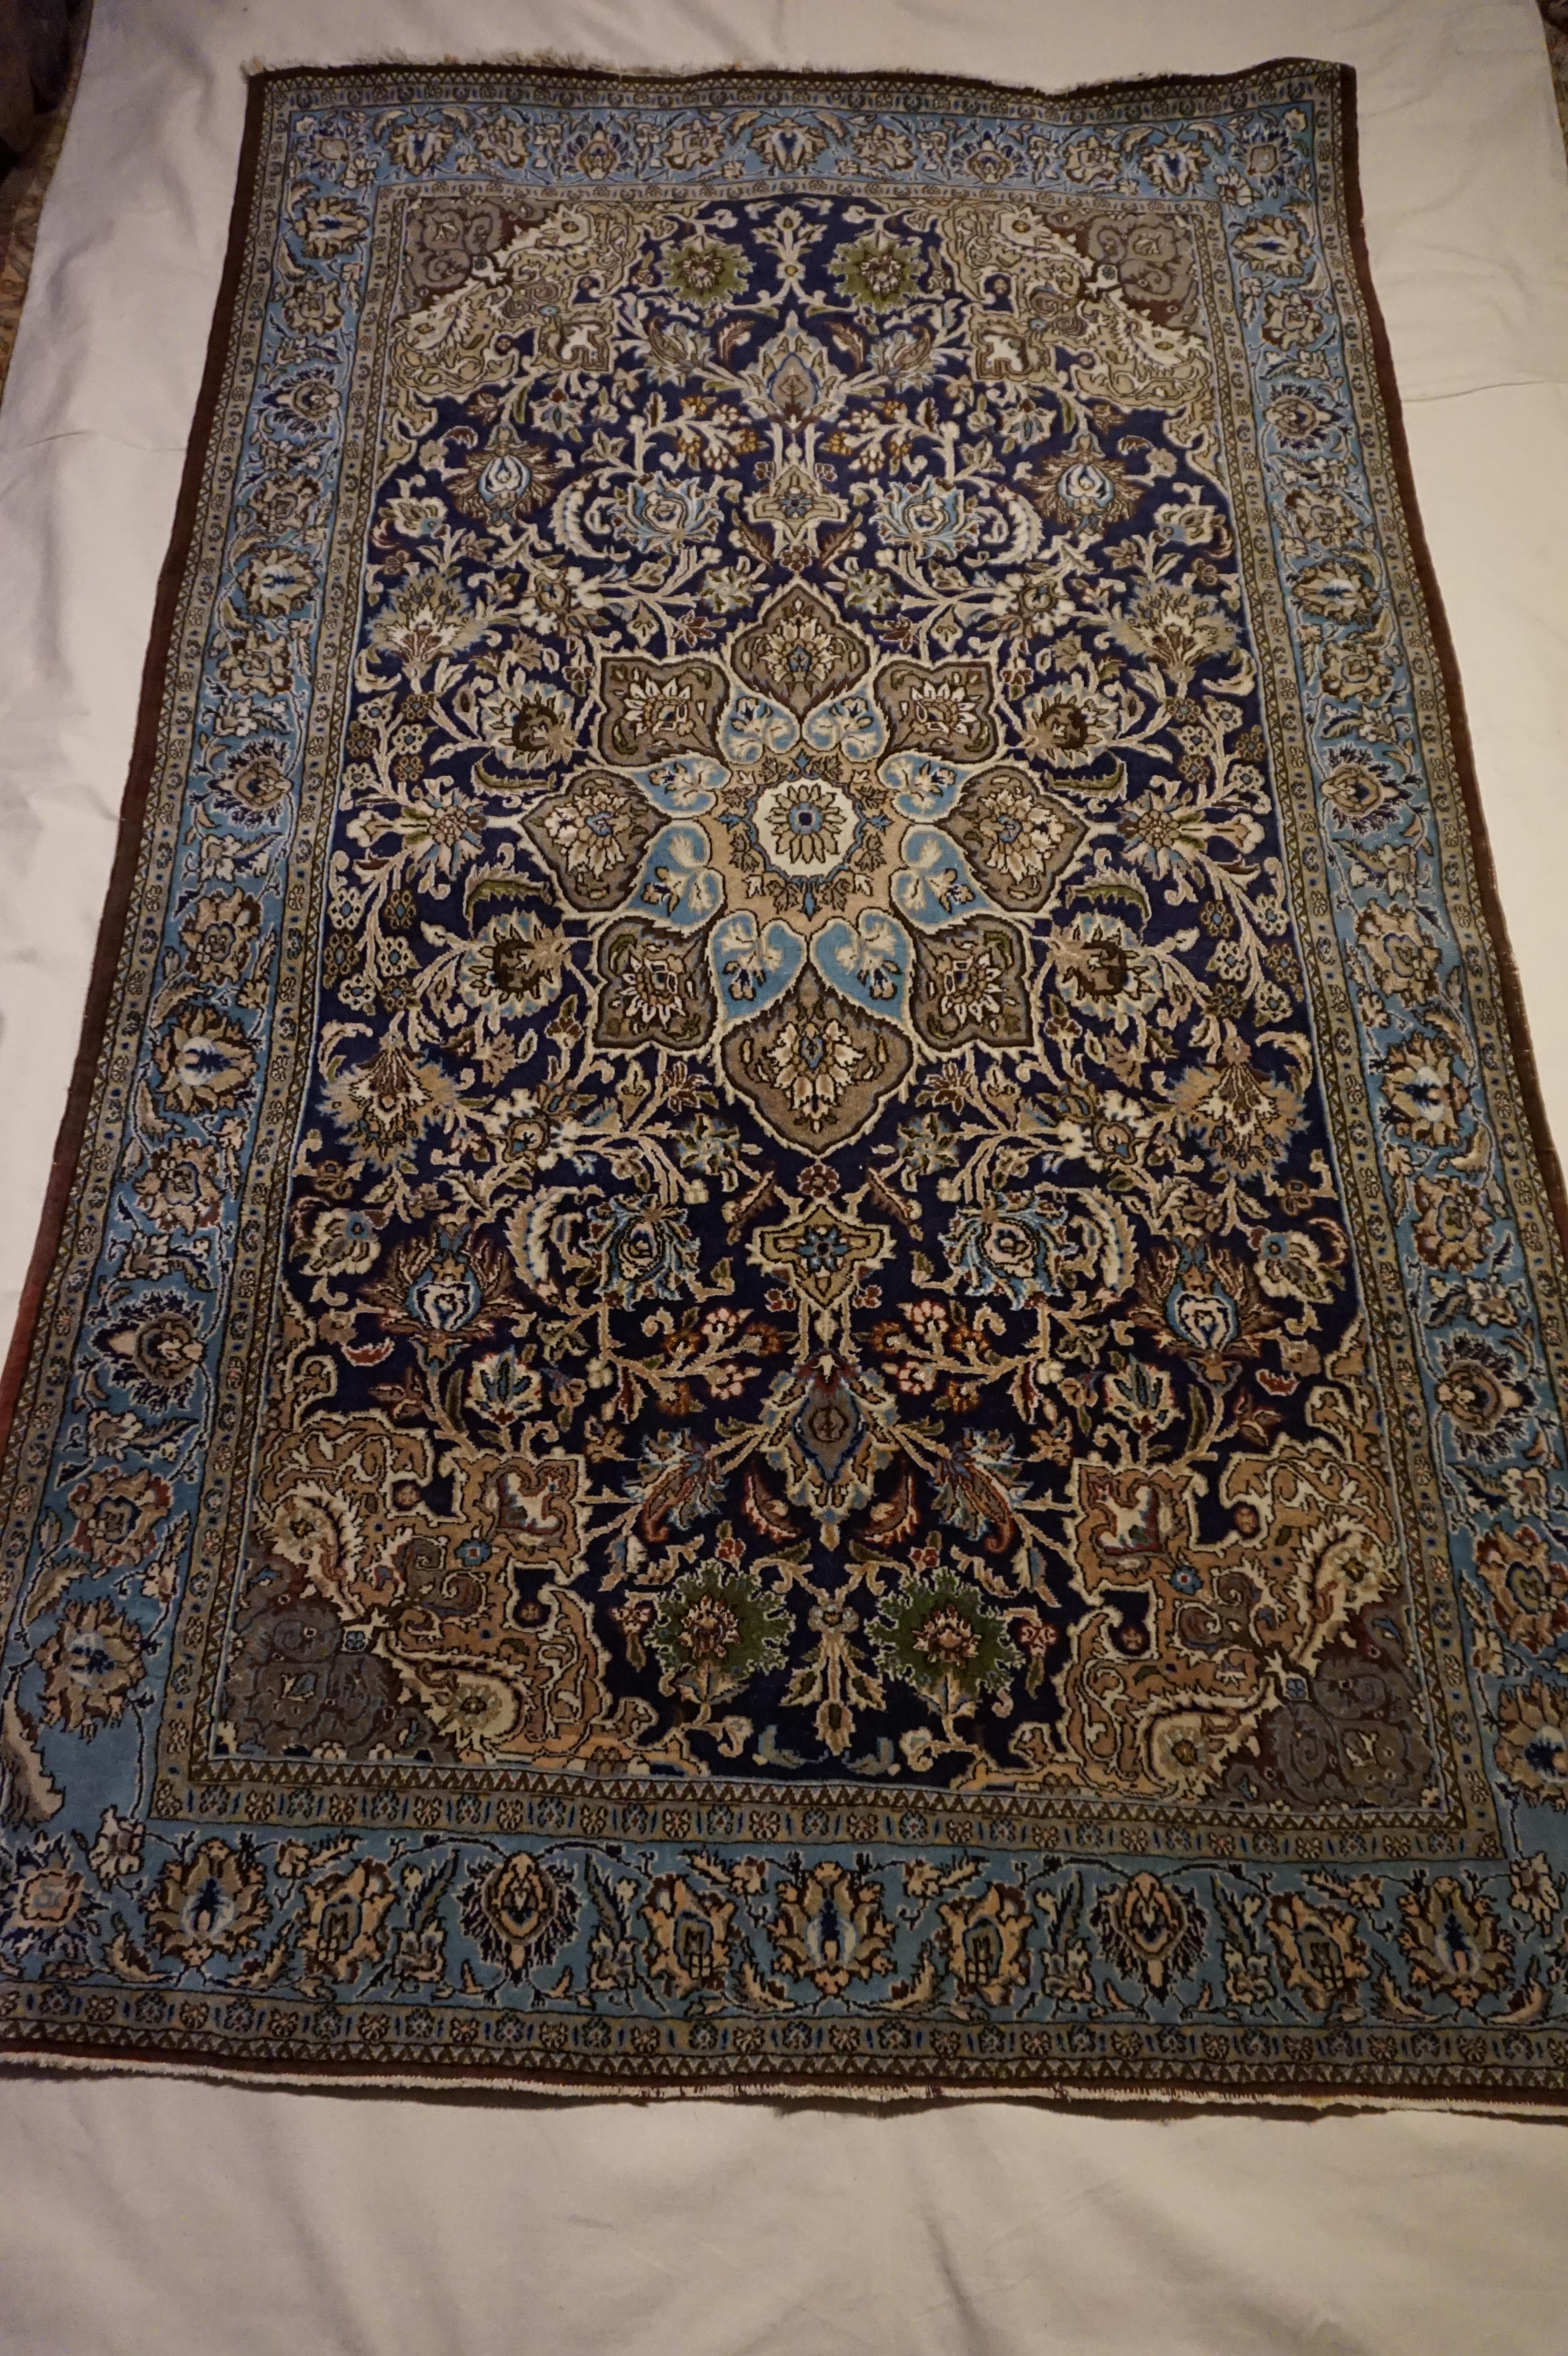 Antique Kashmir Kashan Rug Hand-knotted In Pure Wool In Indigo, Blues & Browns For Sale 4